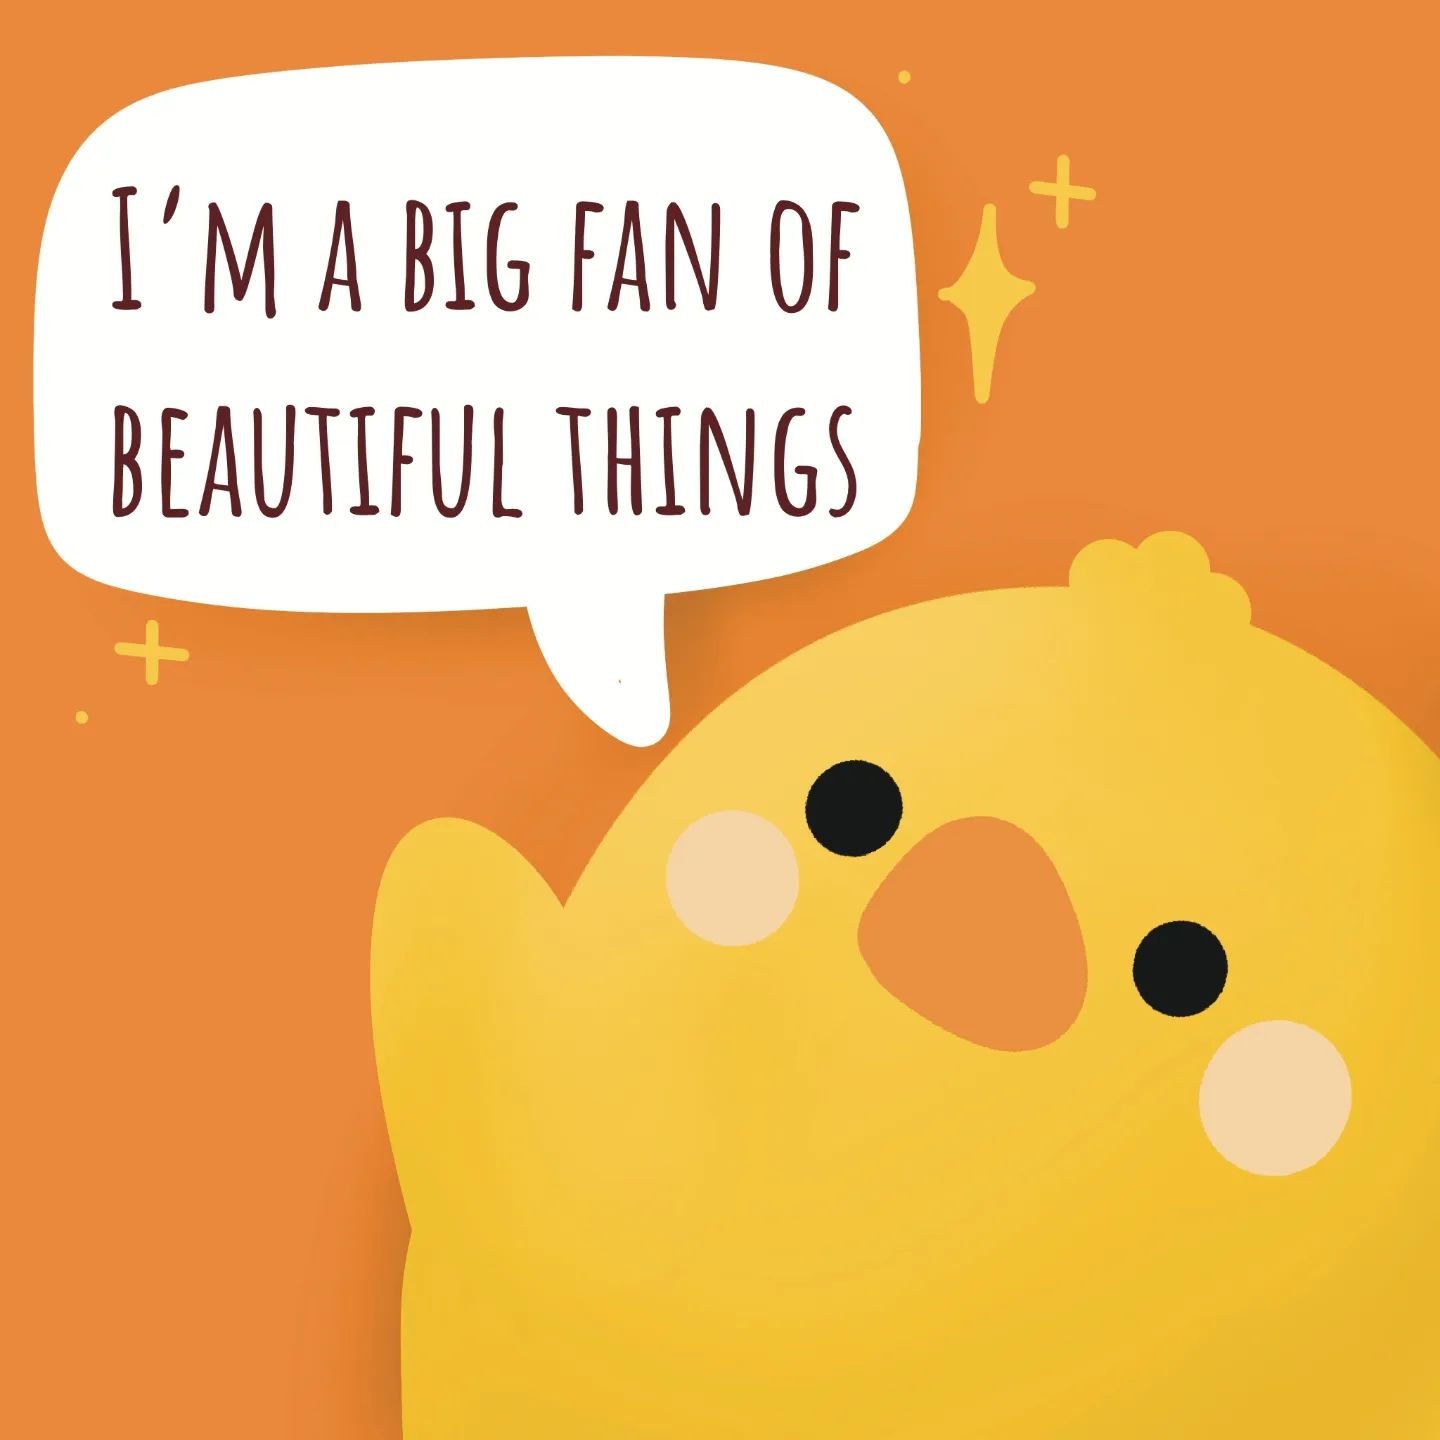 What are beautiful things to you?🥰🥰

#beautiful #pretty #stunning #illustration_daily #illustrationoftheday #fantastic #beautifulthings #prettygirls #chicken #cute #comics #positivevibes #positivity